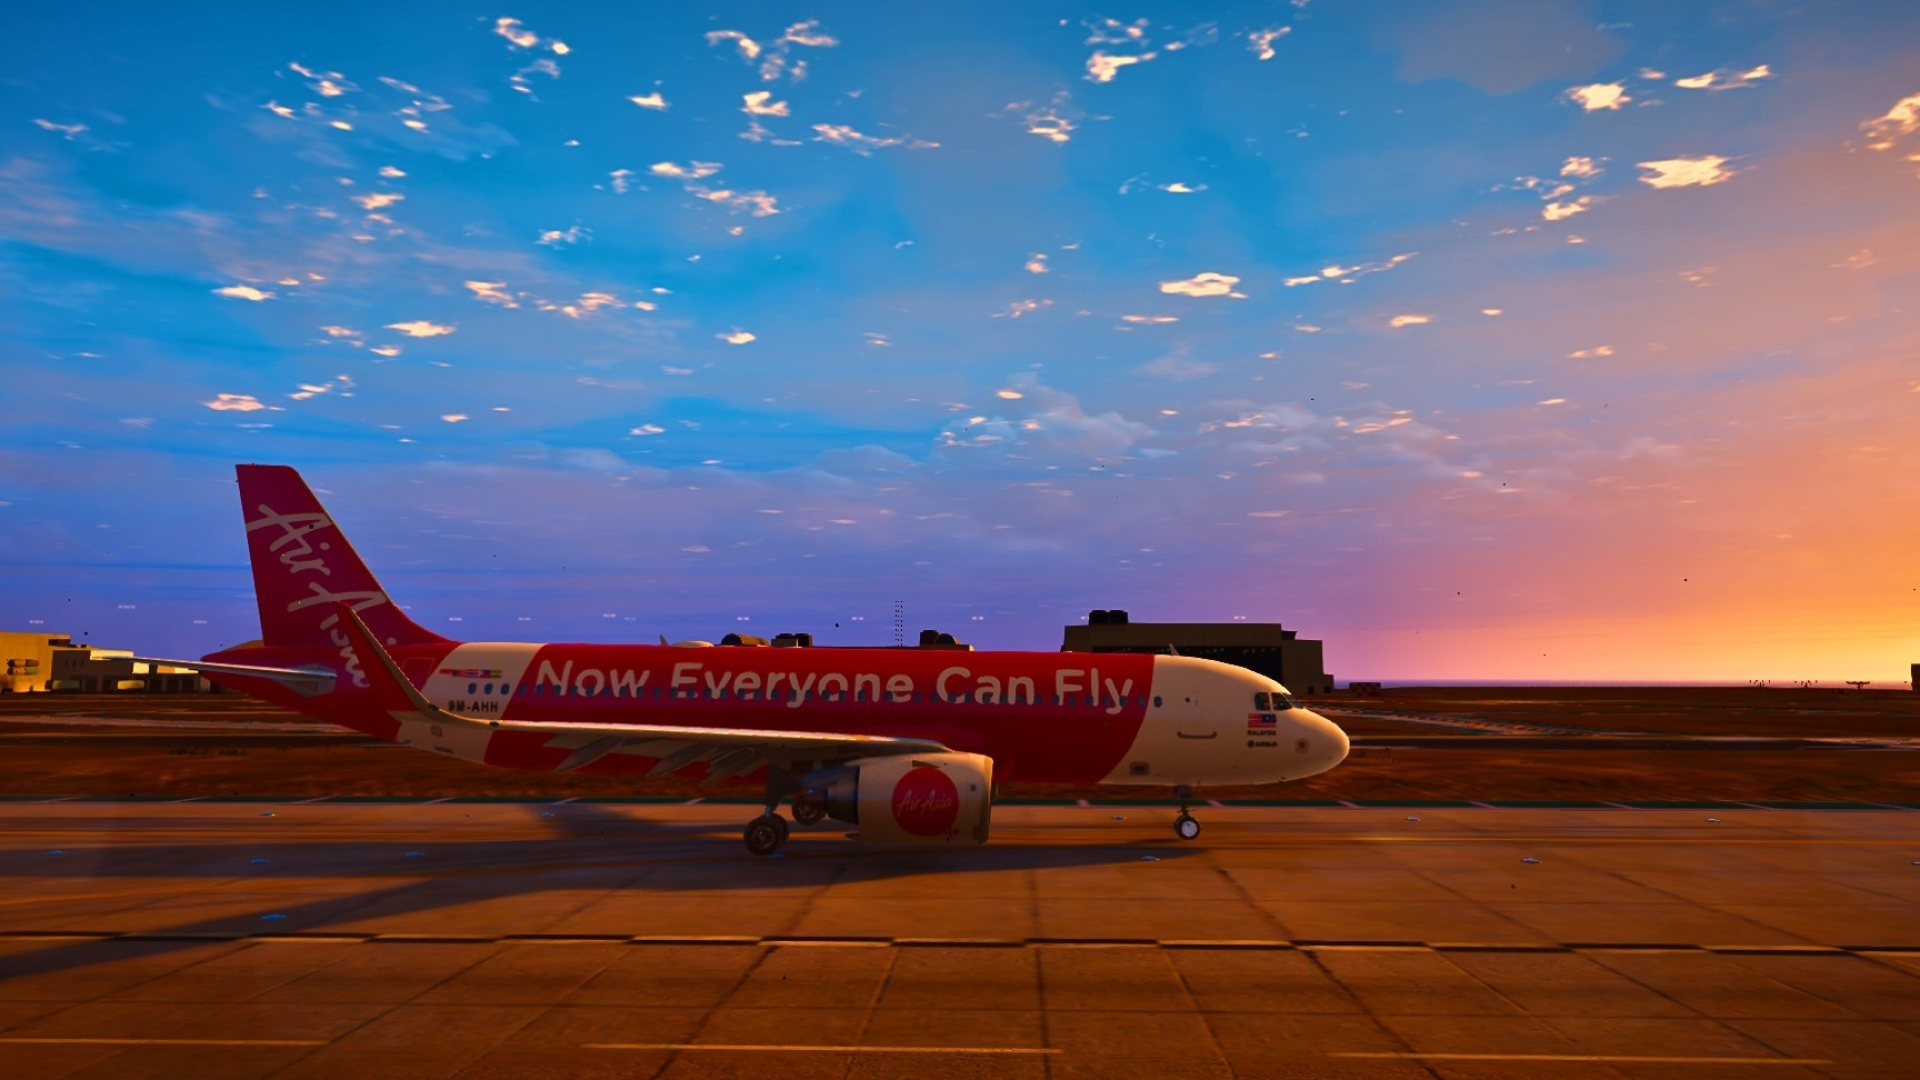 AirAsia livery, Custom aircraft design, Unique modification, Personalized flying experience, 1920x1080 Full HD Desktop